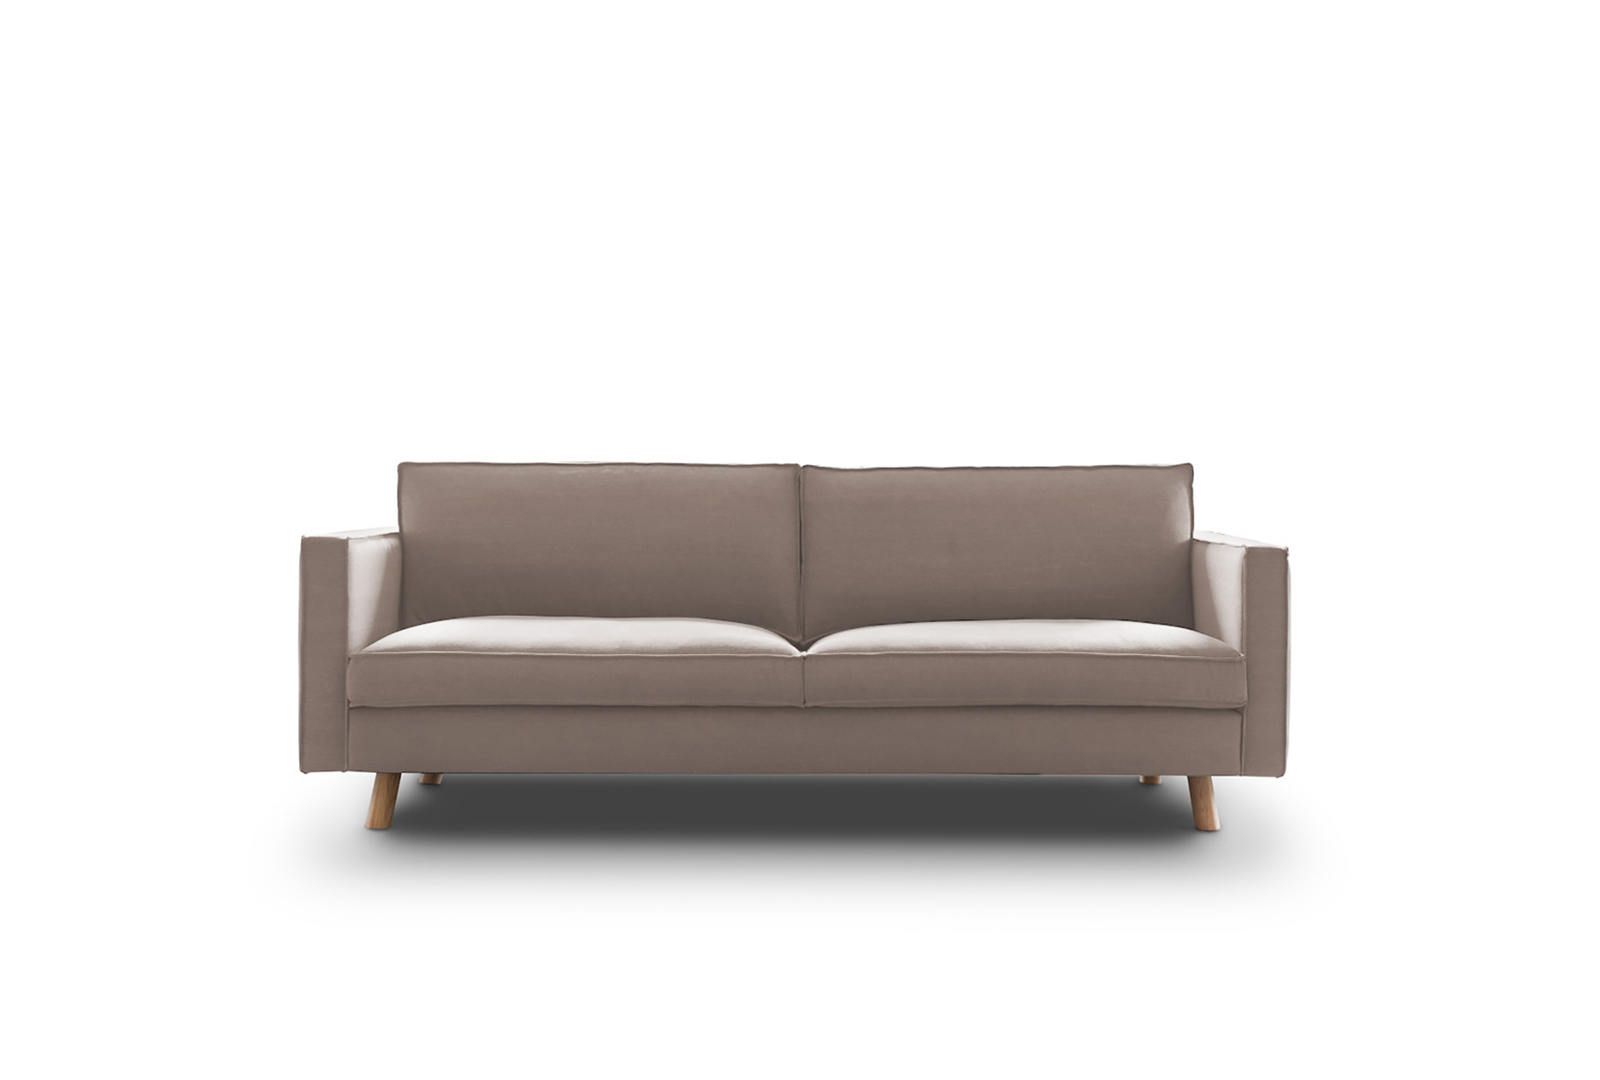 TRAD 2 touch of mist sofa